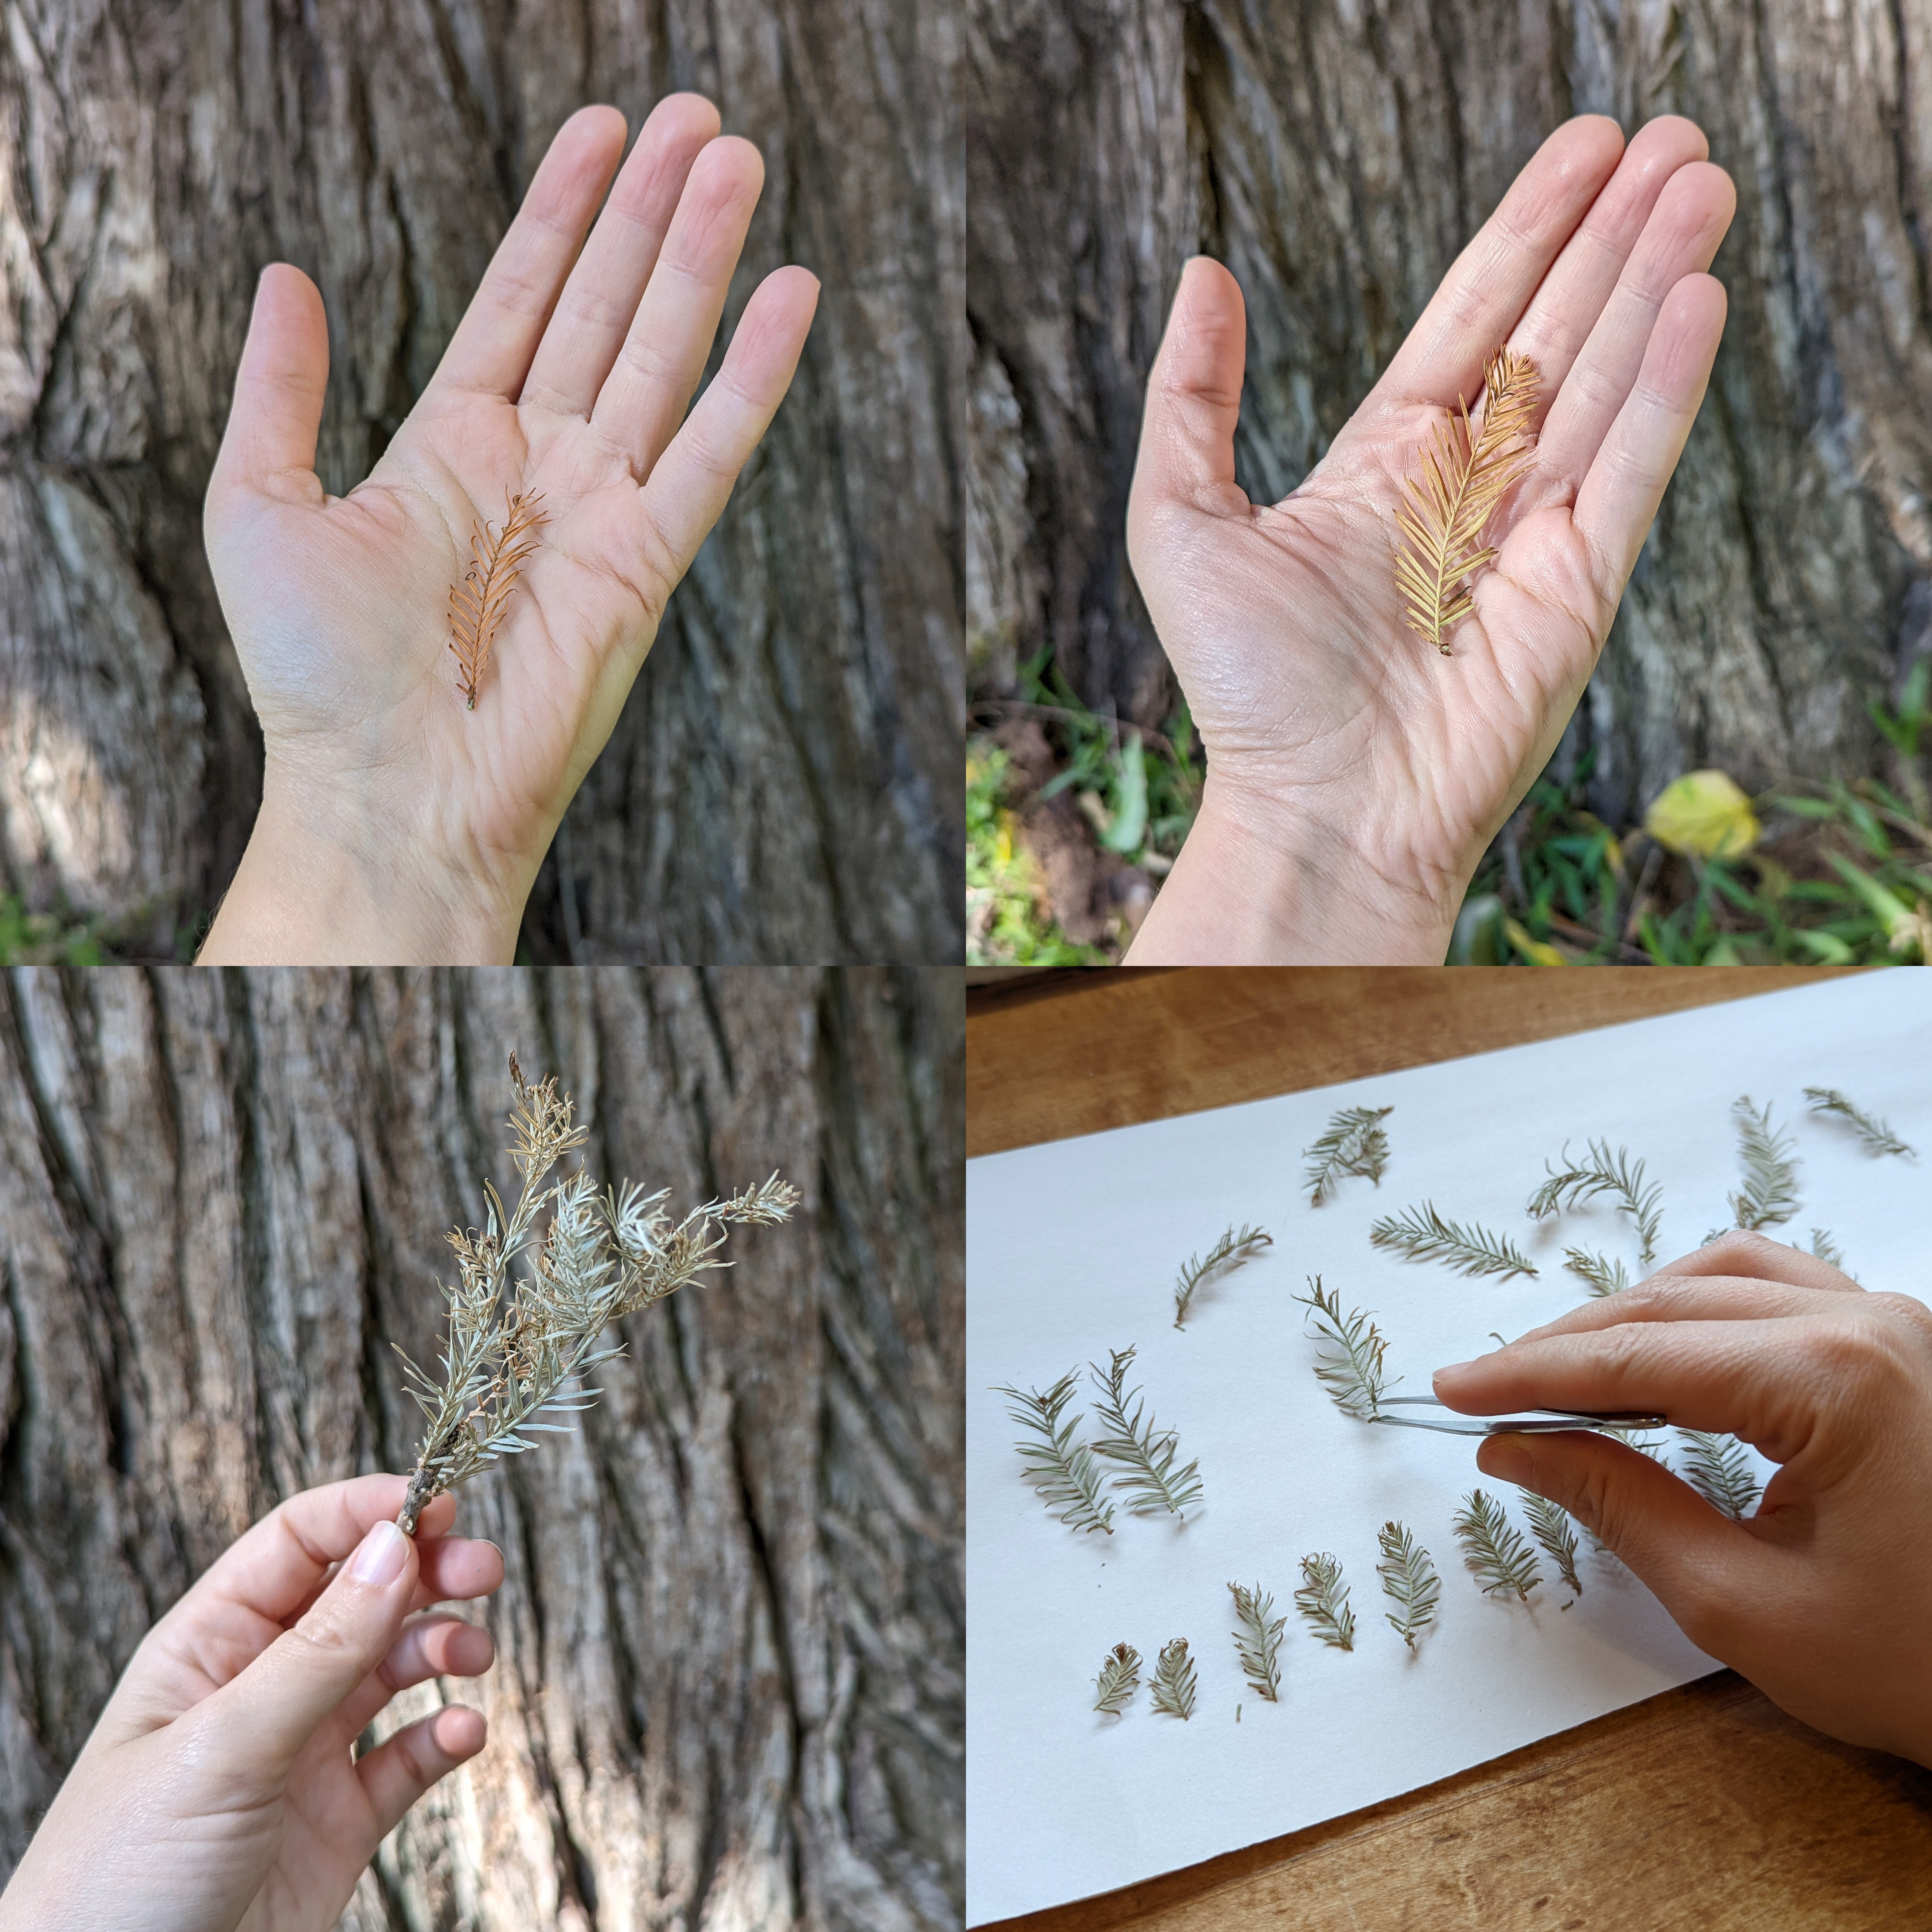 Four pictures of Cat’s hand holding fallen cypress leaves. In the
top left photo, the leaf is burnt orange and centered in their palm. In the
top right photo, the leaf is centered in their palm and fades from light
green to golden yellow to burnt orange. In the bottom right photo, Cat holds
a small branch that houses several foamy-green cypress leaves that have touches of gold on their tips. In the bottom right photo, Cat uses tweezers to
place foamy-green cypress leaves into a grid.
